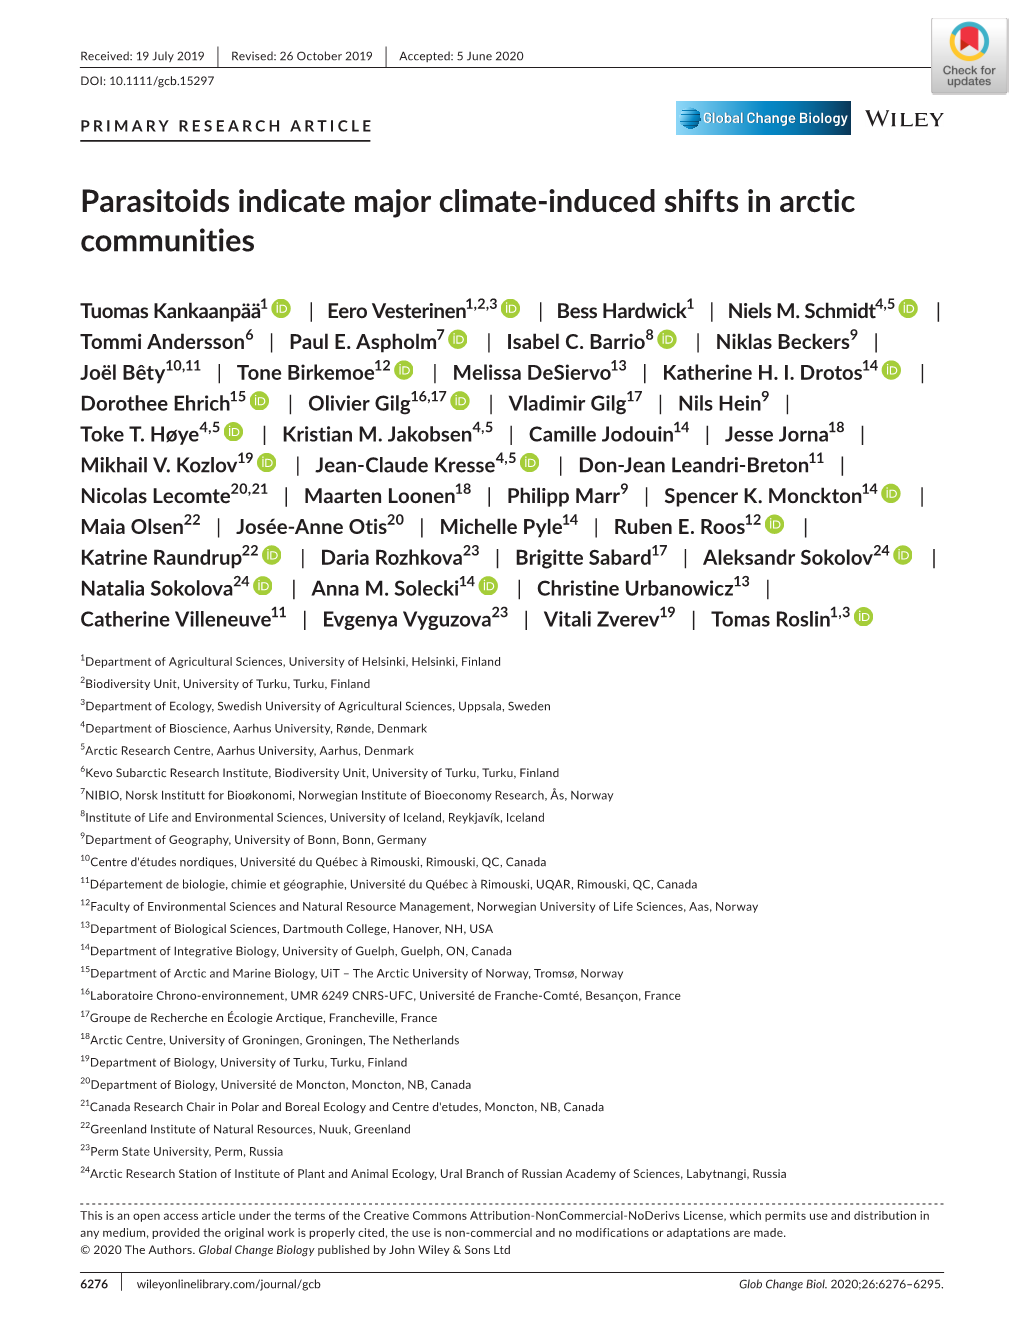 Parasitoids Indicate Major Climate‐Induced Shifts in Arctic Communities